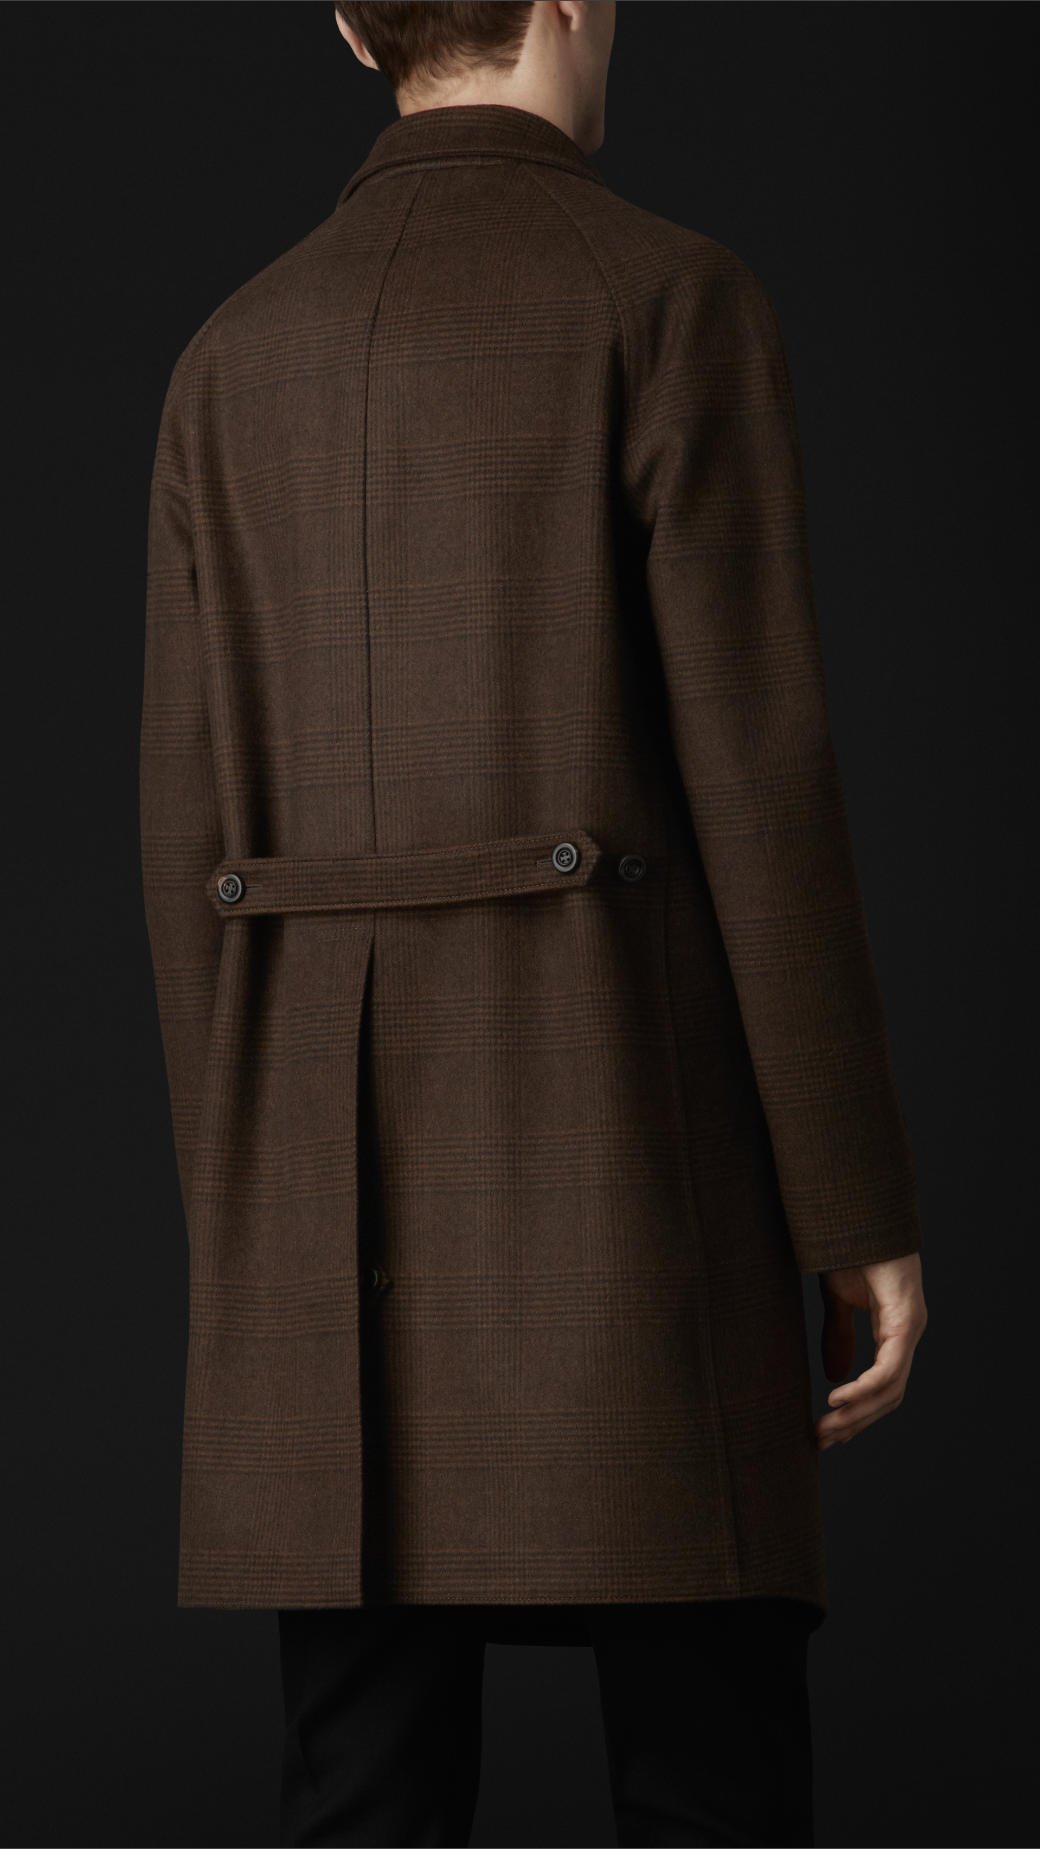 Lyst - Burberry Prorsum Prince Of Wales Check Wool Car Coat in Brown ...